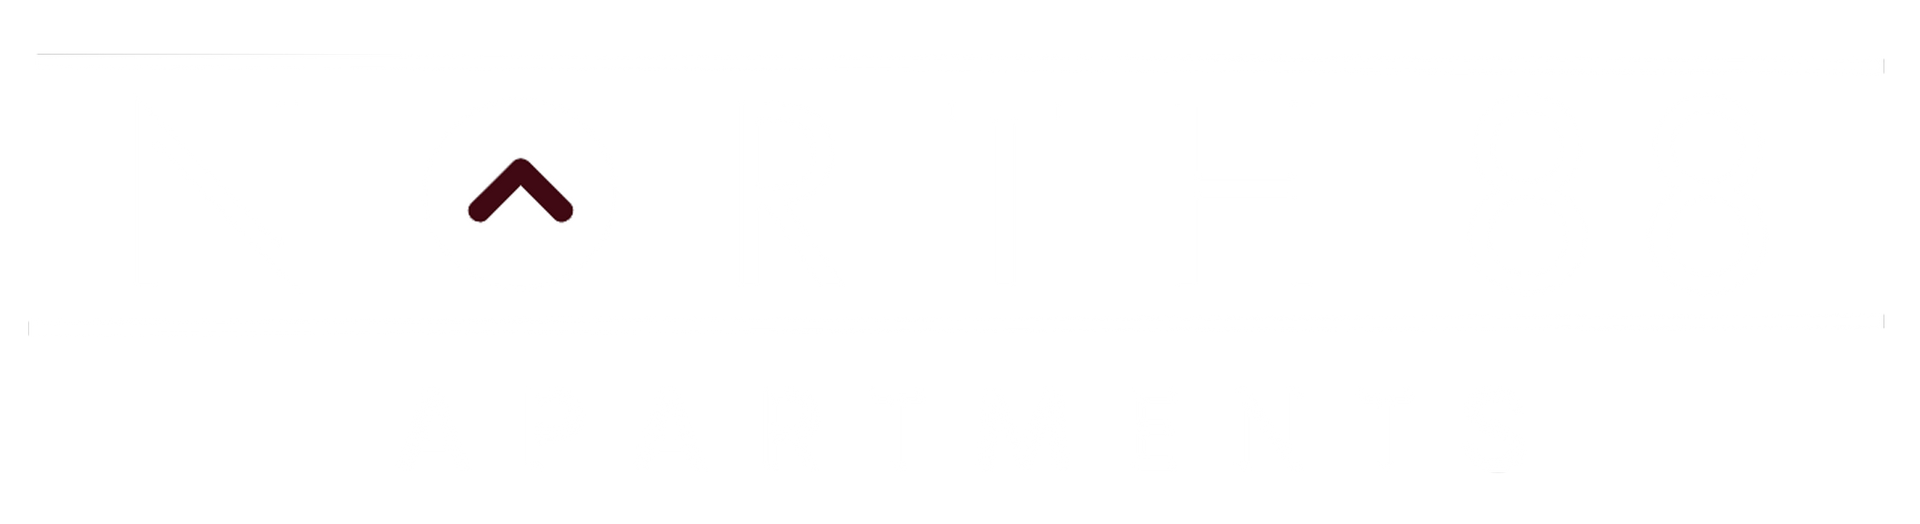 North 88 Apartments Company Logo - click to go home page